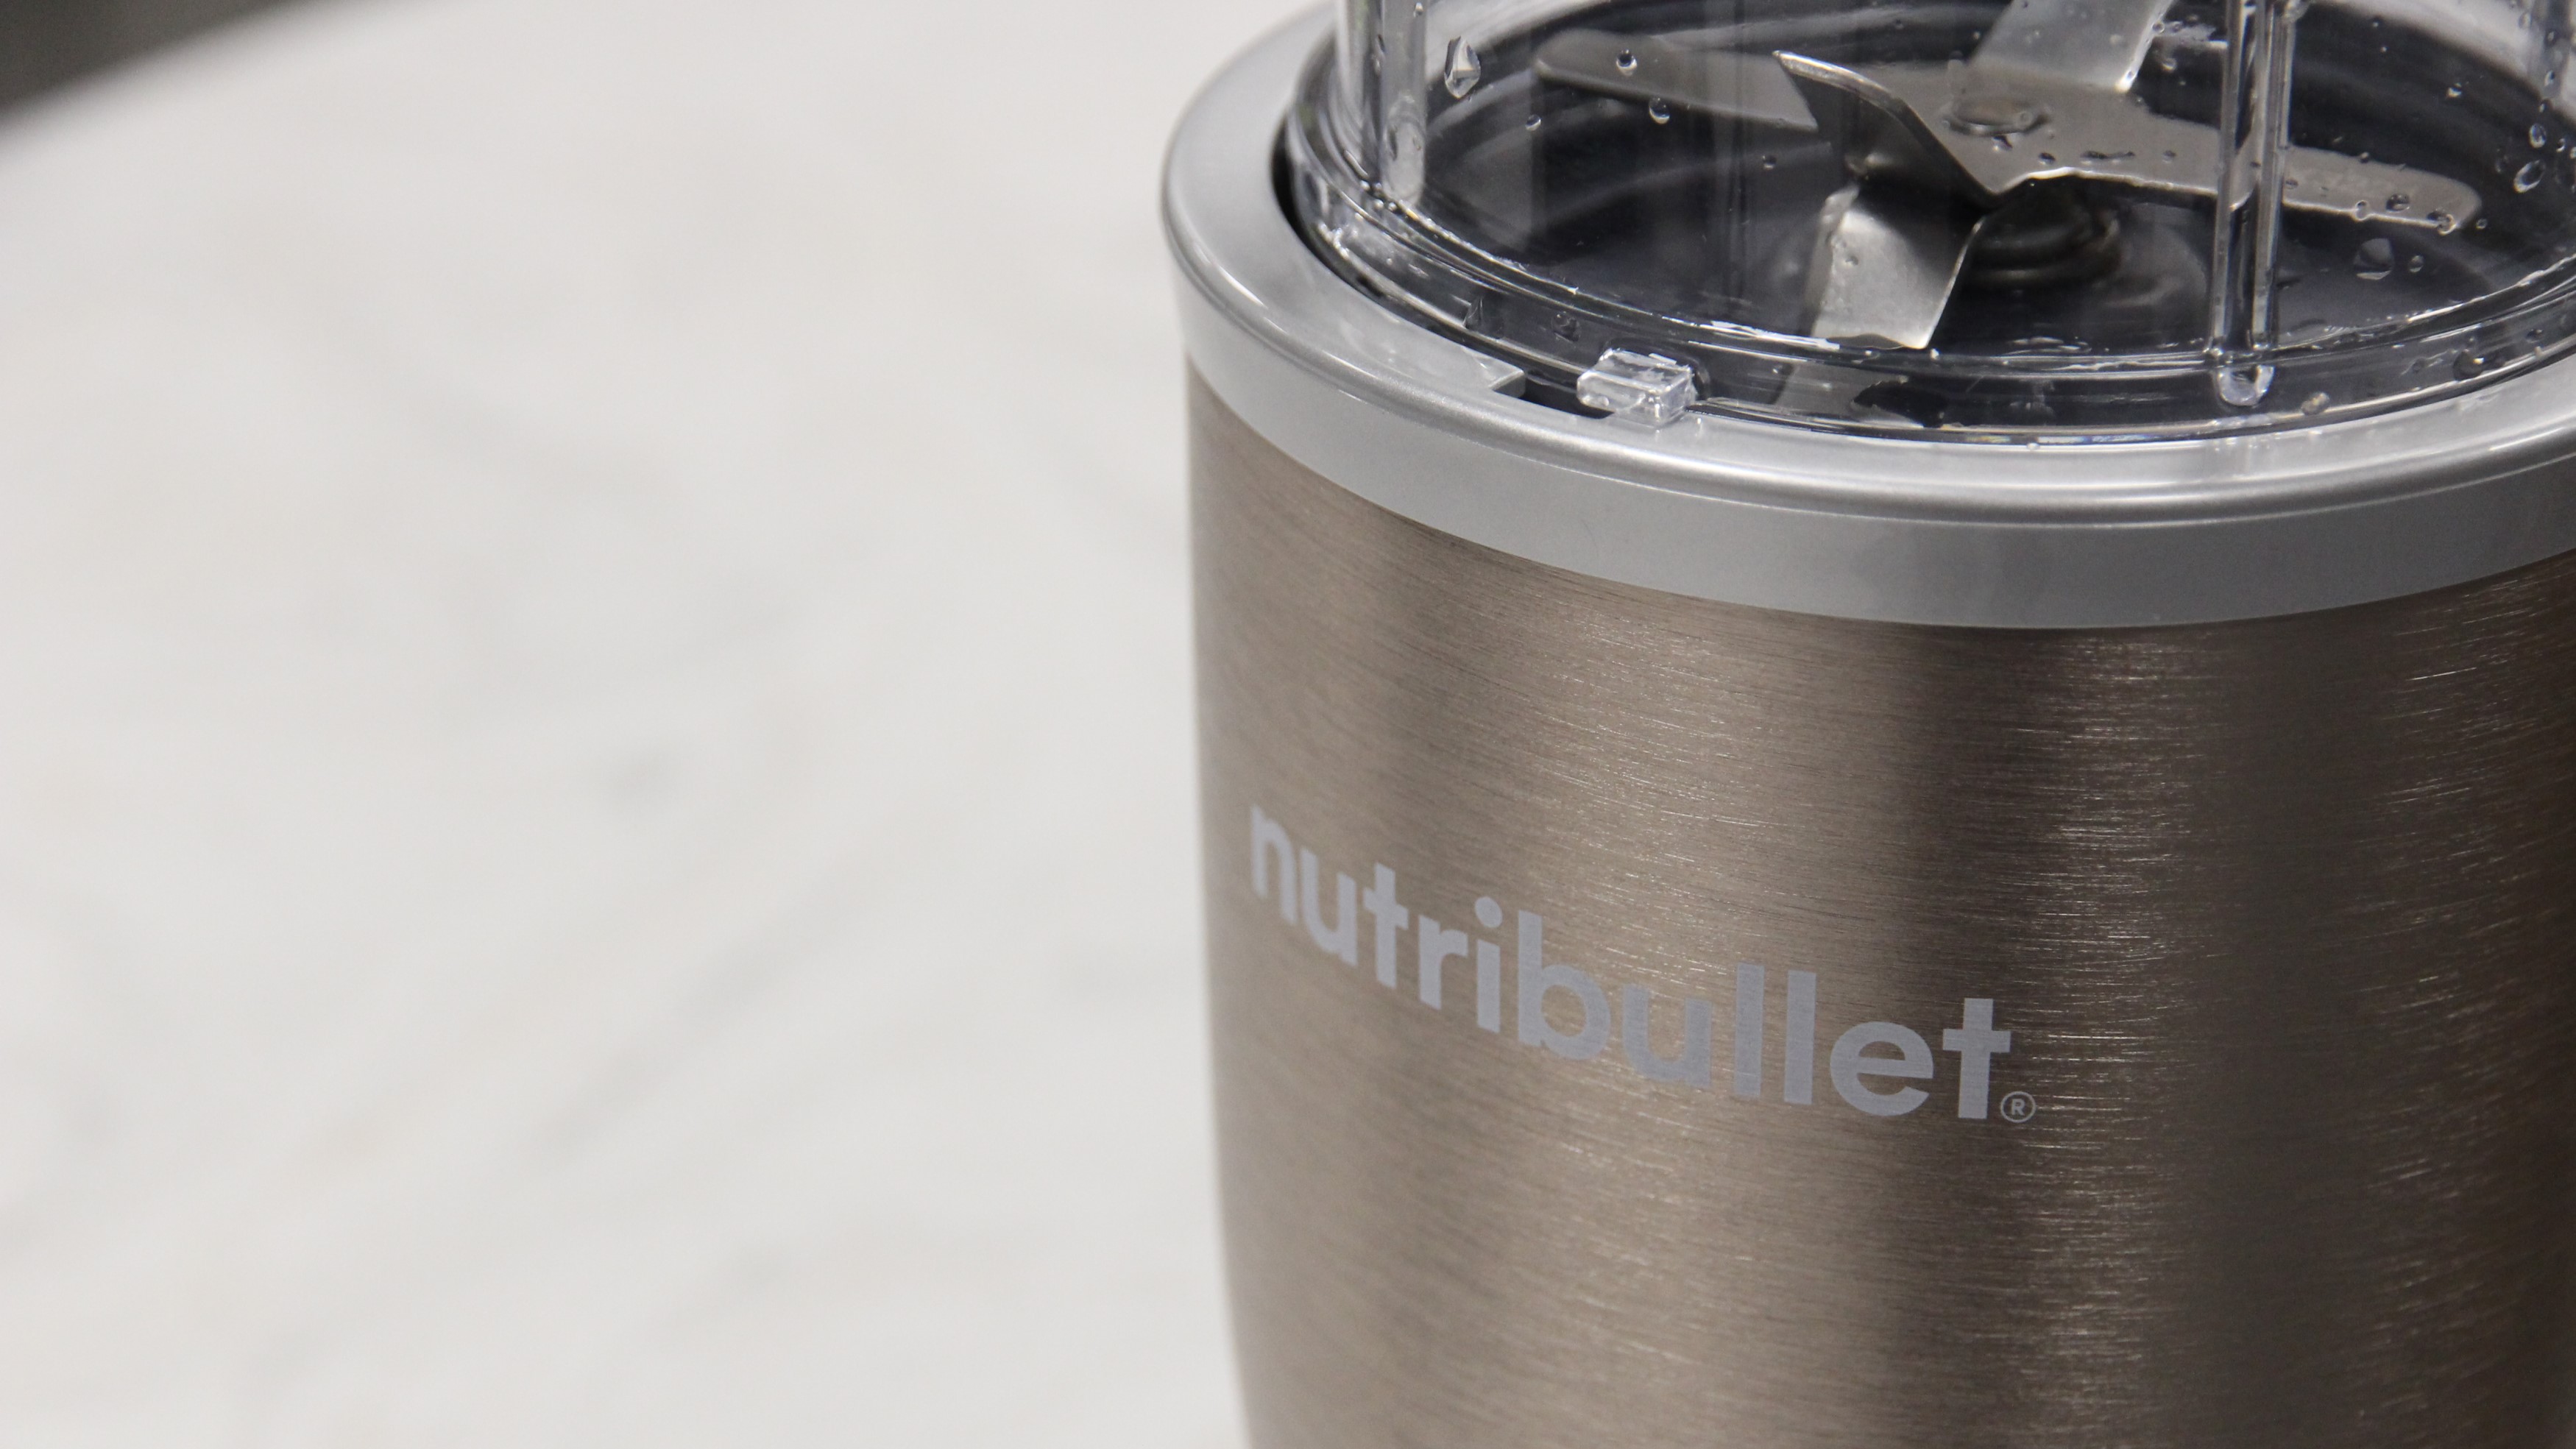 Brands SA - The NutriBullet 900 series provides all the nutritional  benefits of the original NutriBullet and more. With it's 900 watt motor and  increased capacity, the NutriBullet Pro even further pulverizes